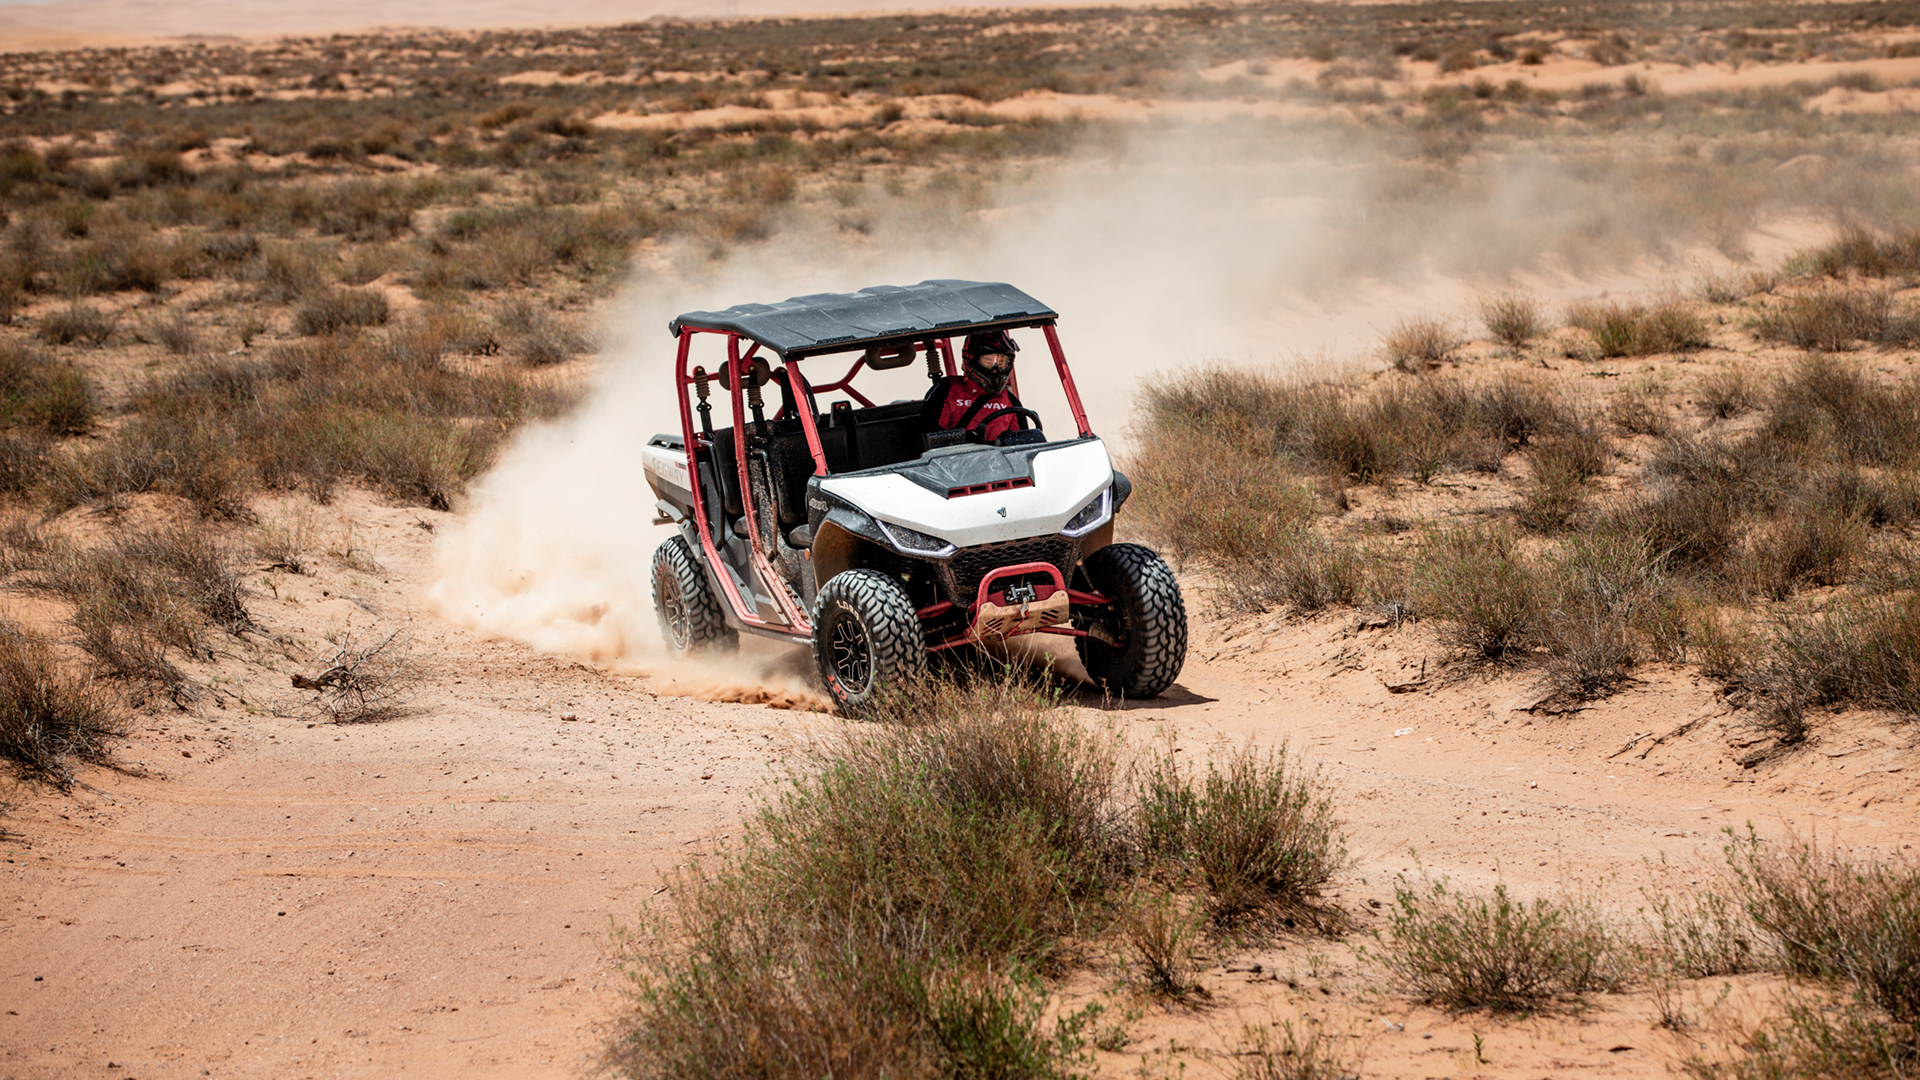 A man is seen driving a Segway UTV (utility task vehicle) through a vast desert landscape. The UTV is a rugged SUV-like vehicle designed for off-road use, and it is kicking up dust as it travels along a sandy road. The man is wearing a red jacket and a helmet, indicating that he is taking safety precautions while driving. The scene is characterized by the arid desert environment, with dunes and sand stretching out in all directions. The image captures the adventurous spirit of exploring remote desert terrains in a sturdy off-road vehicle.